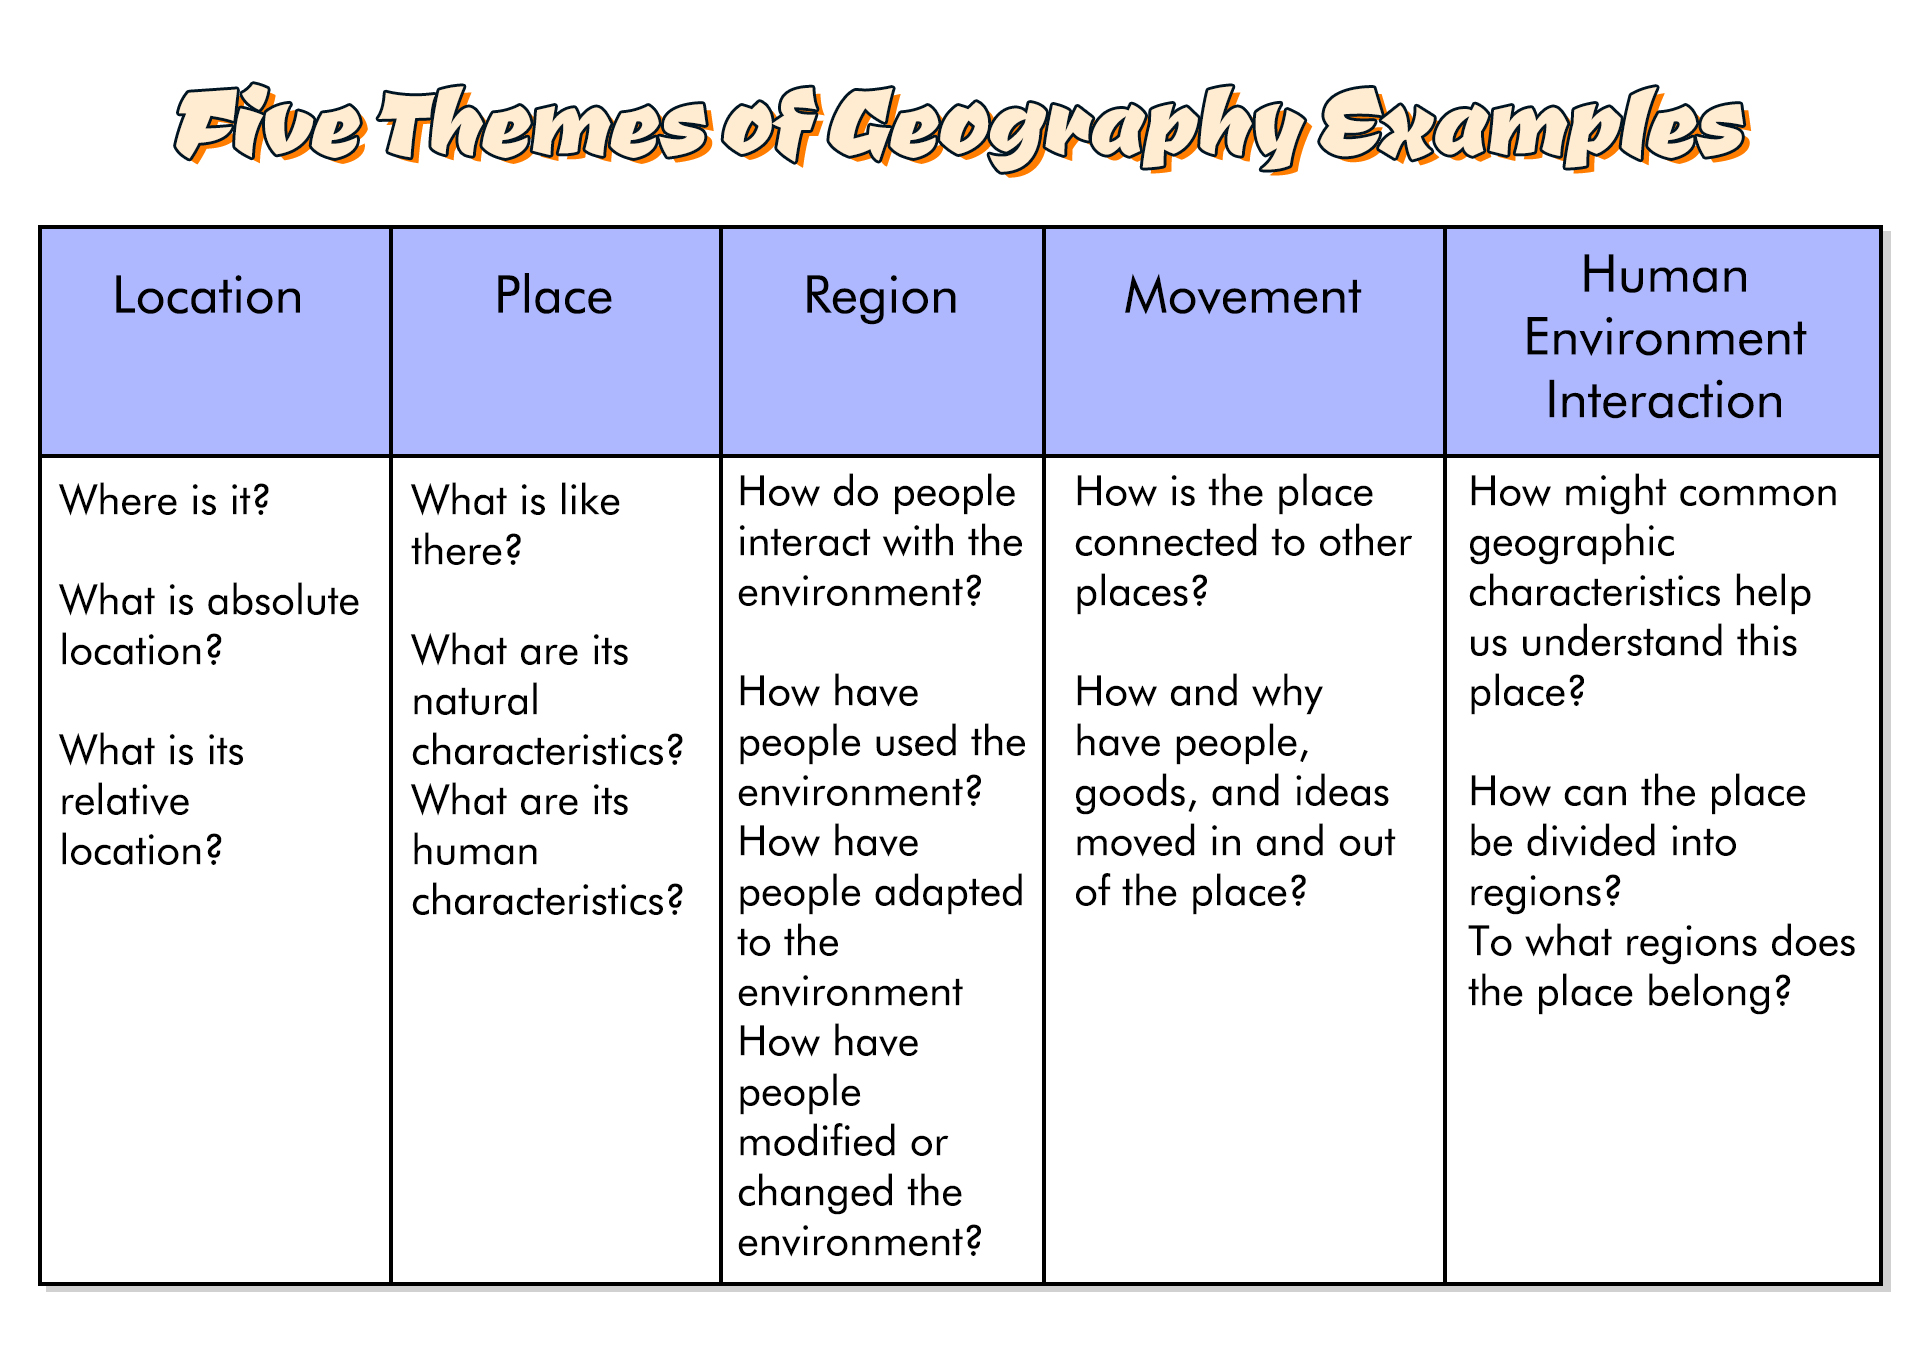 Five Themes of Geography Examples